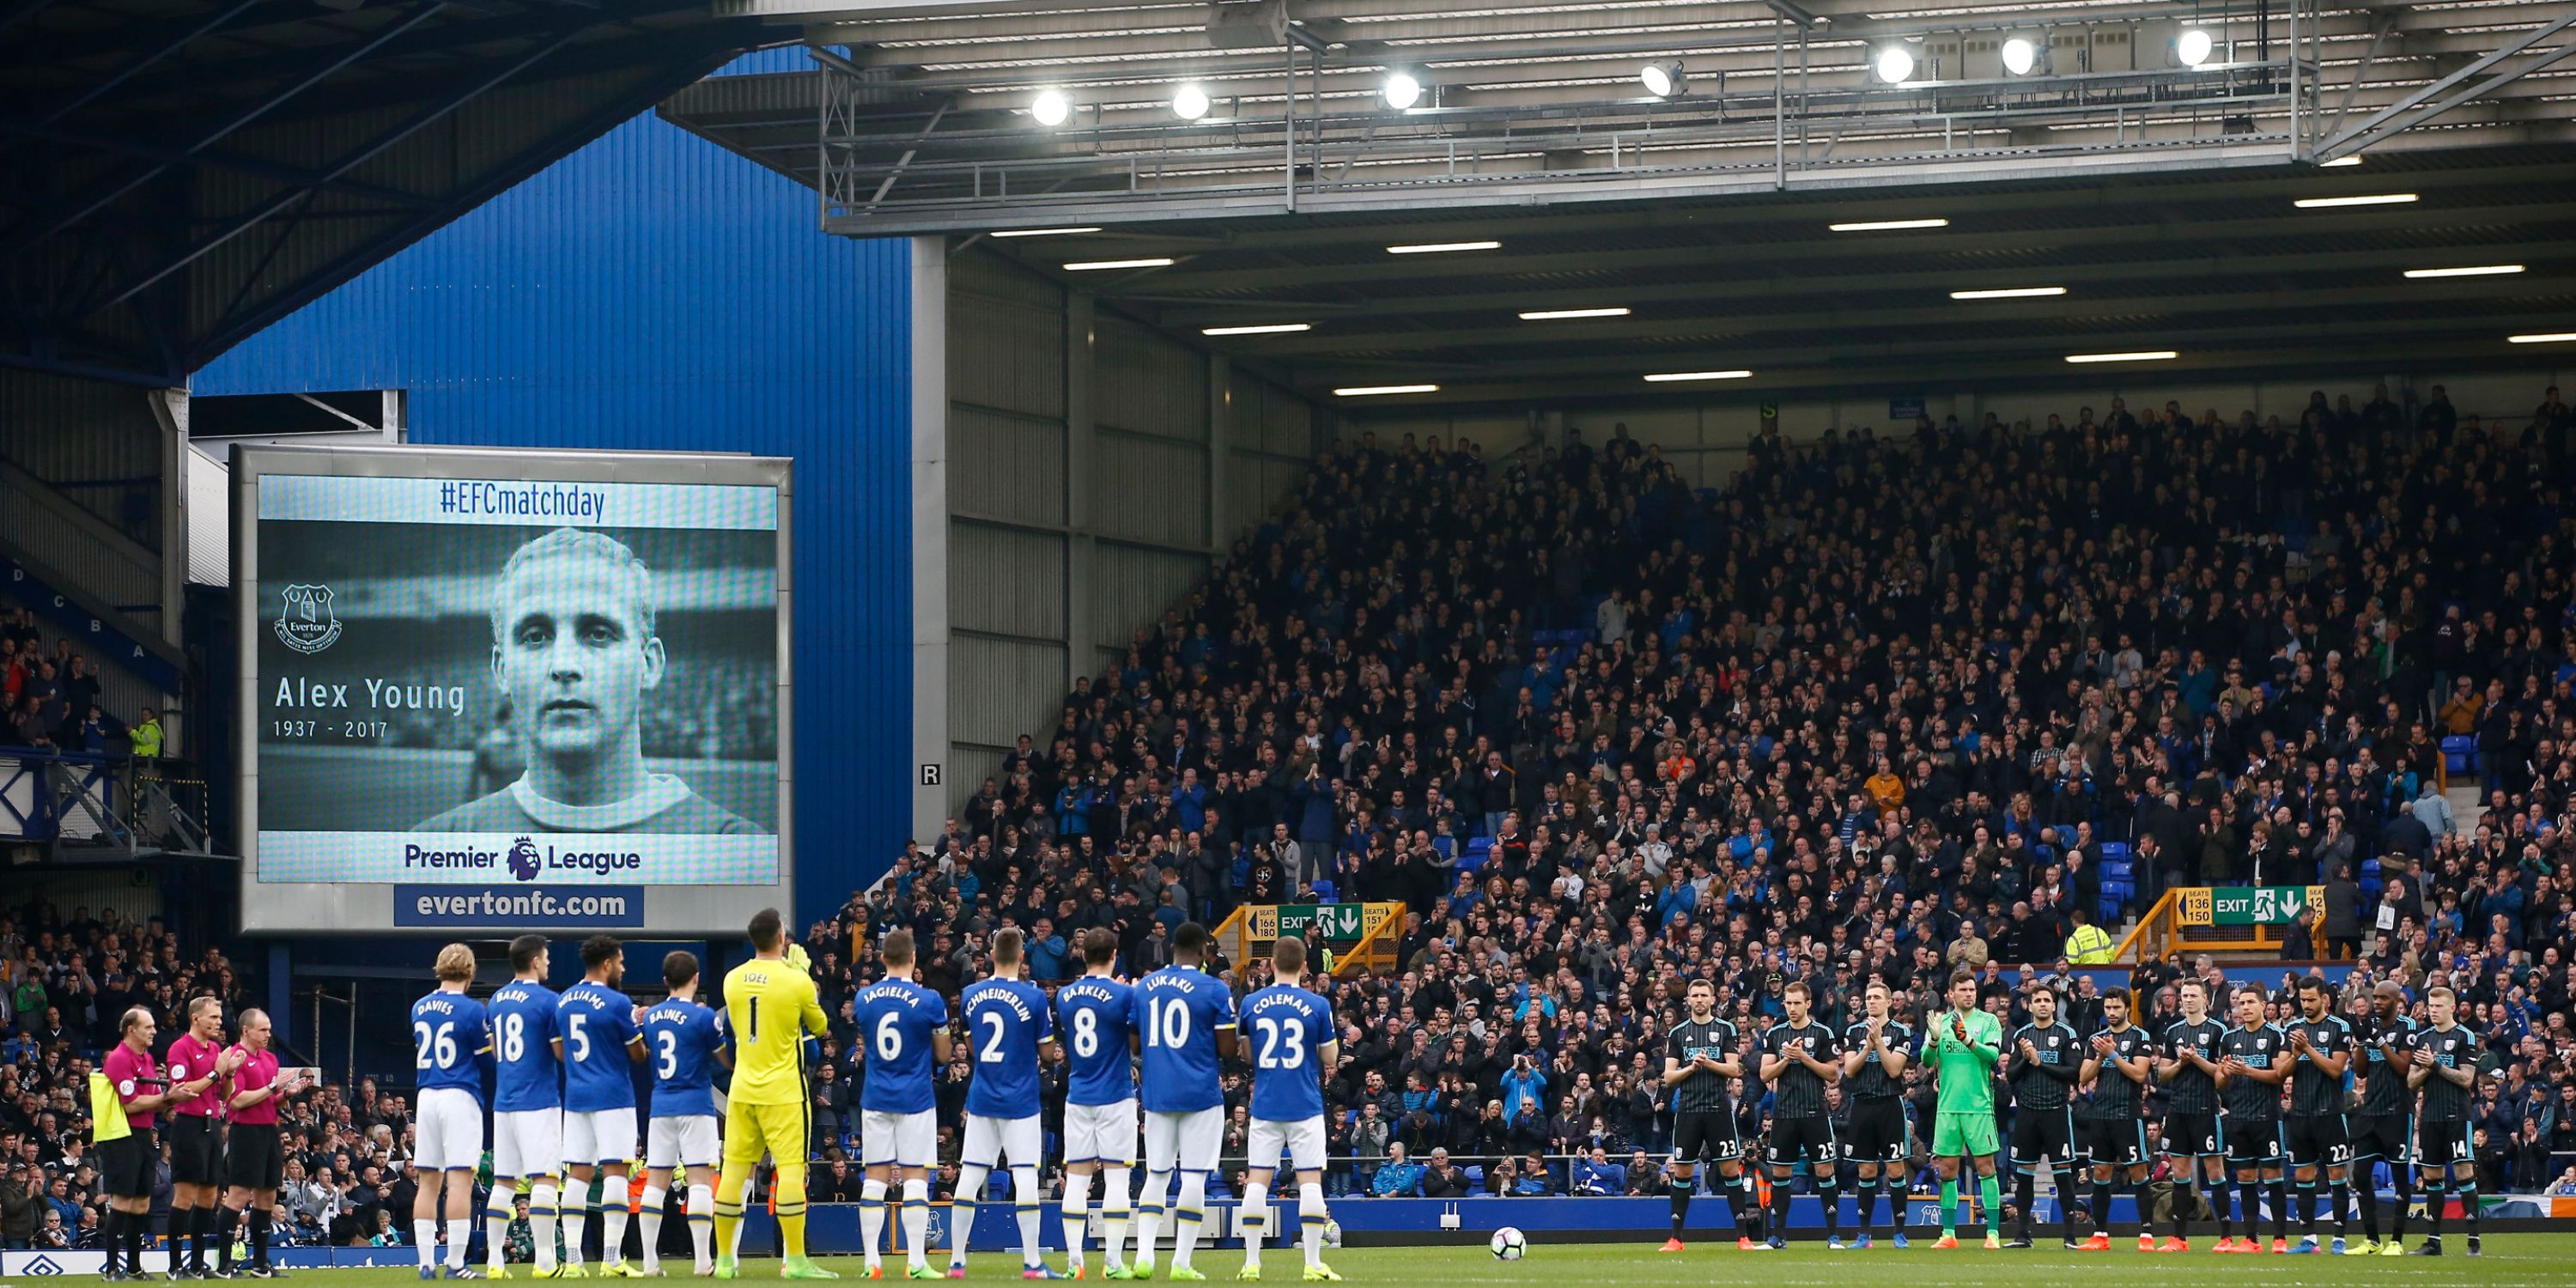 Everton's players pay tribute to club icon Alex Young after he passed away in 2017